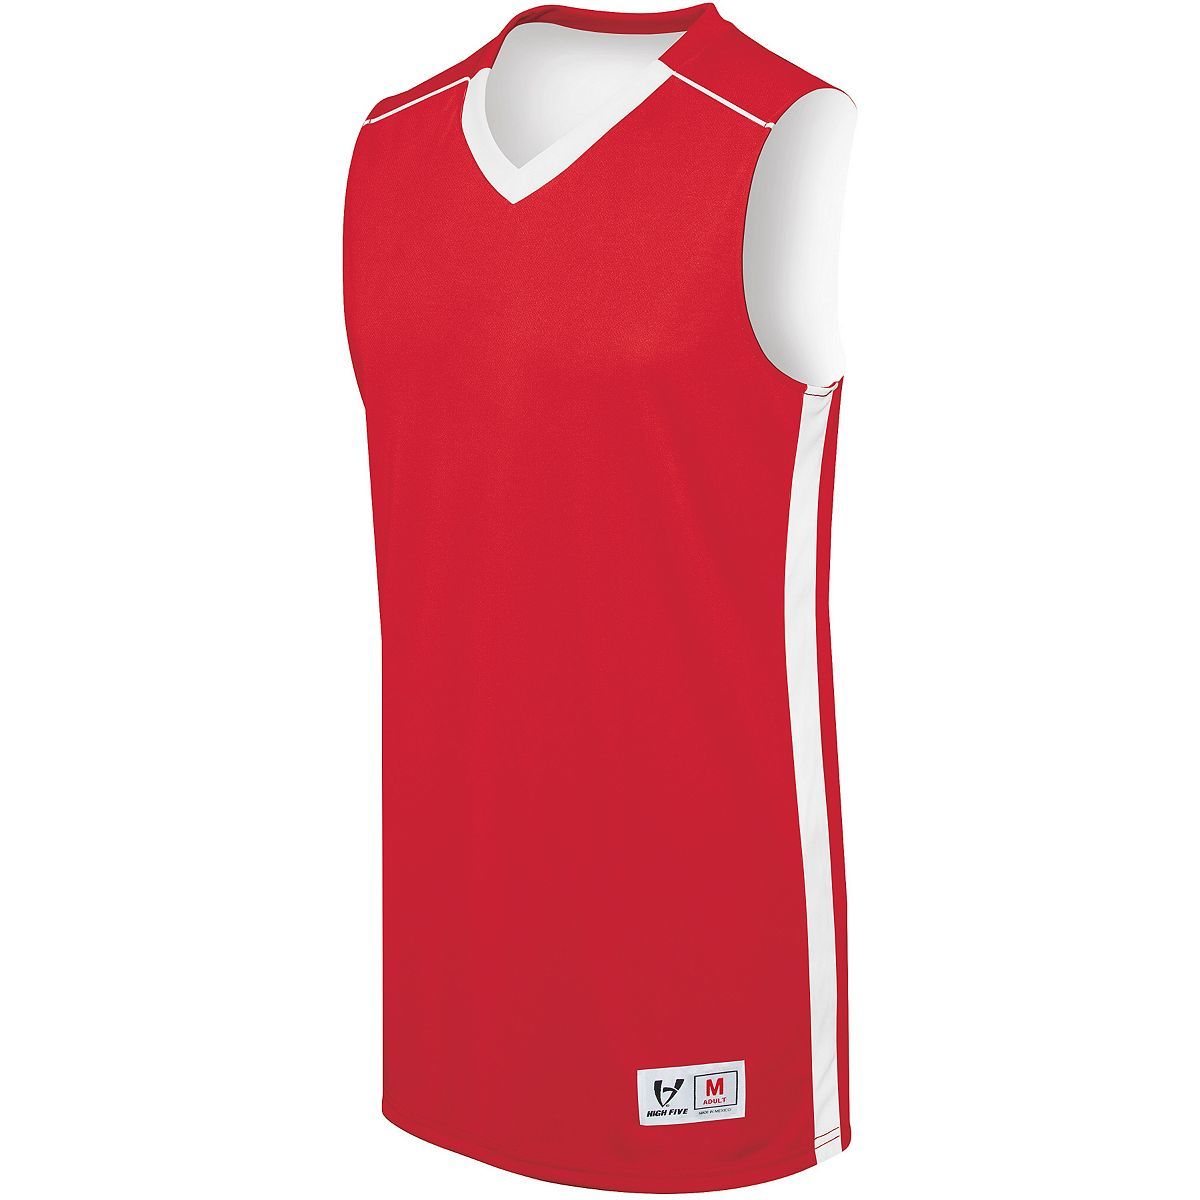 Augusta Sportswear Youth Competition Reversible Jersey in Scarlet/White  -Part of the Youth, Youth-Jersey, Augusta-Products, Basketball, Shirts, All-Sports, All-Sports-1 product lines at KanaleyCreations.com